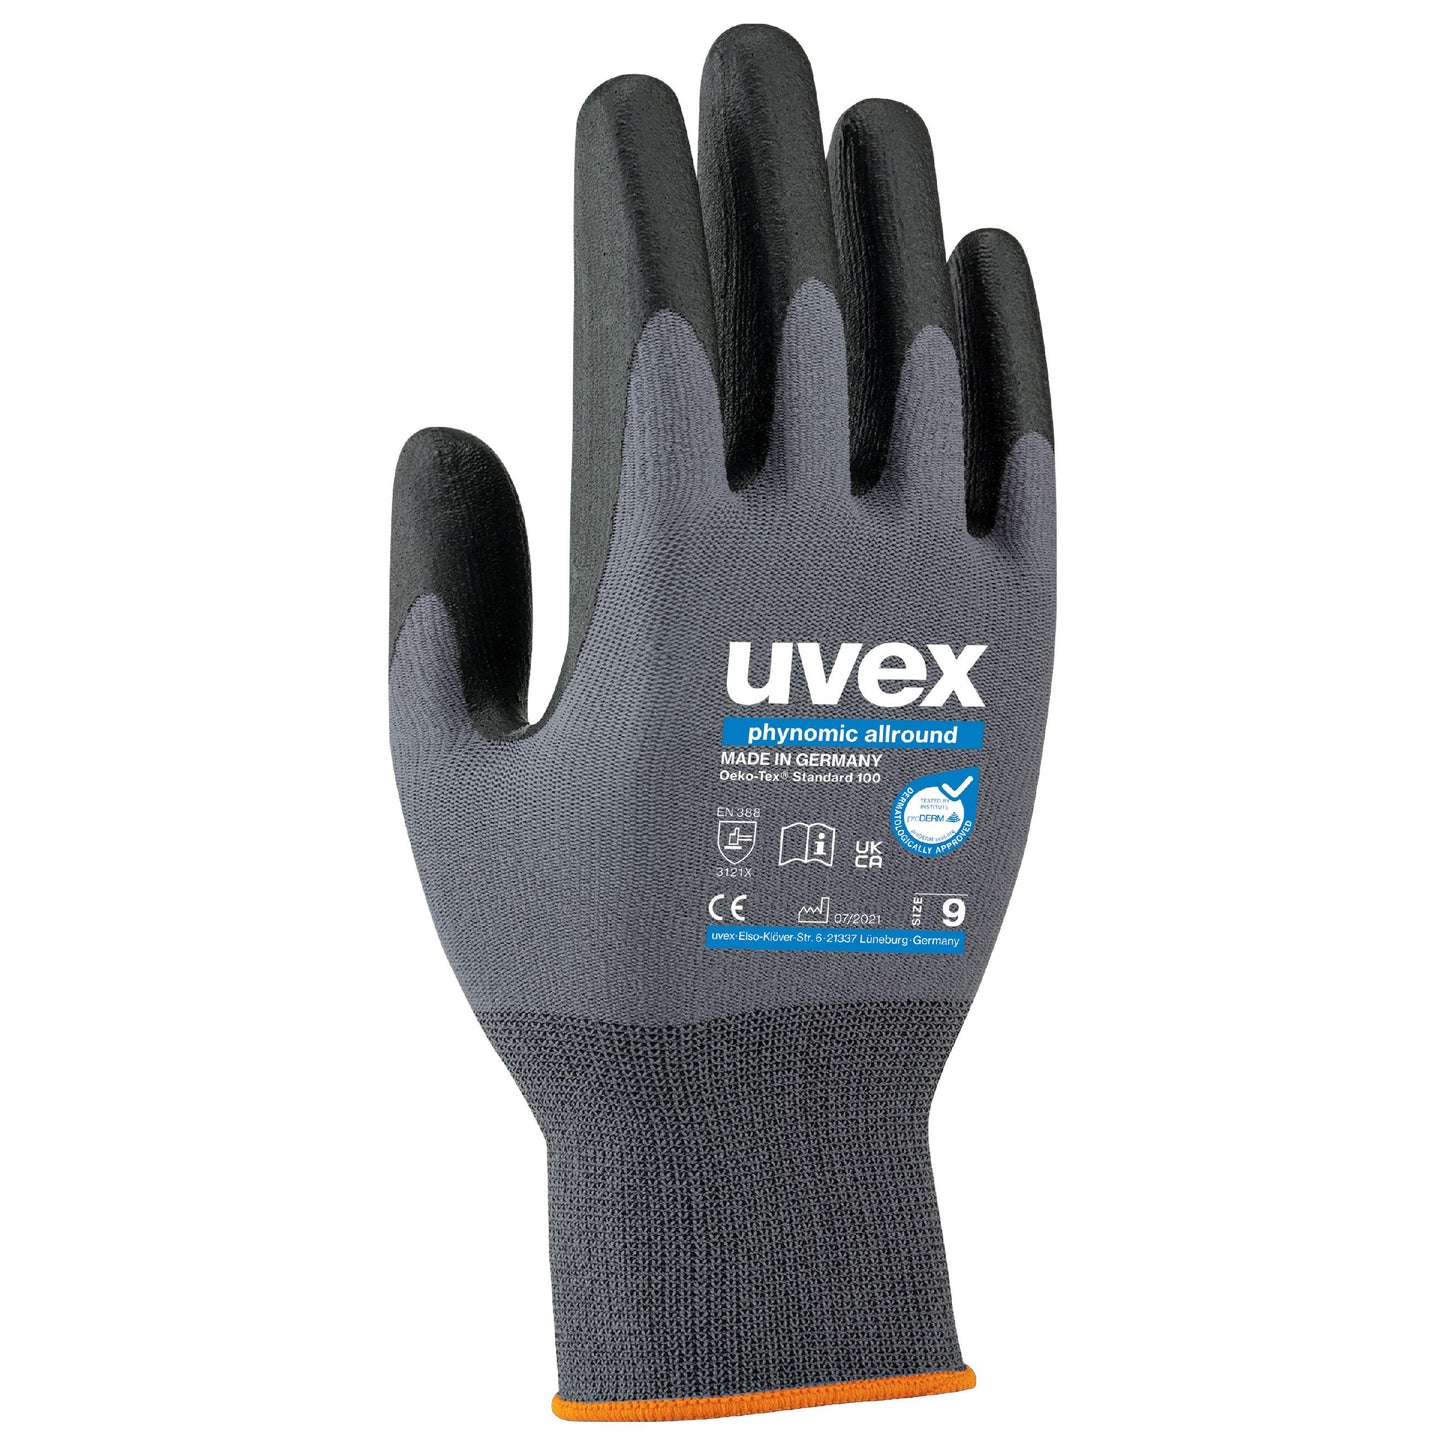 uvex 60070 phynomic allround ppe safety work gloves. Aqua-polymer foam coated palms. Best safety gloves for general handling use. protexu